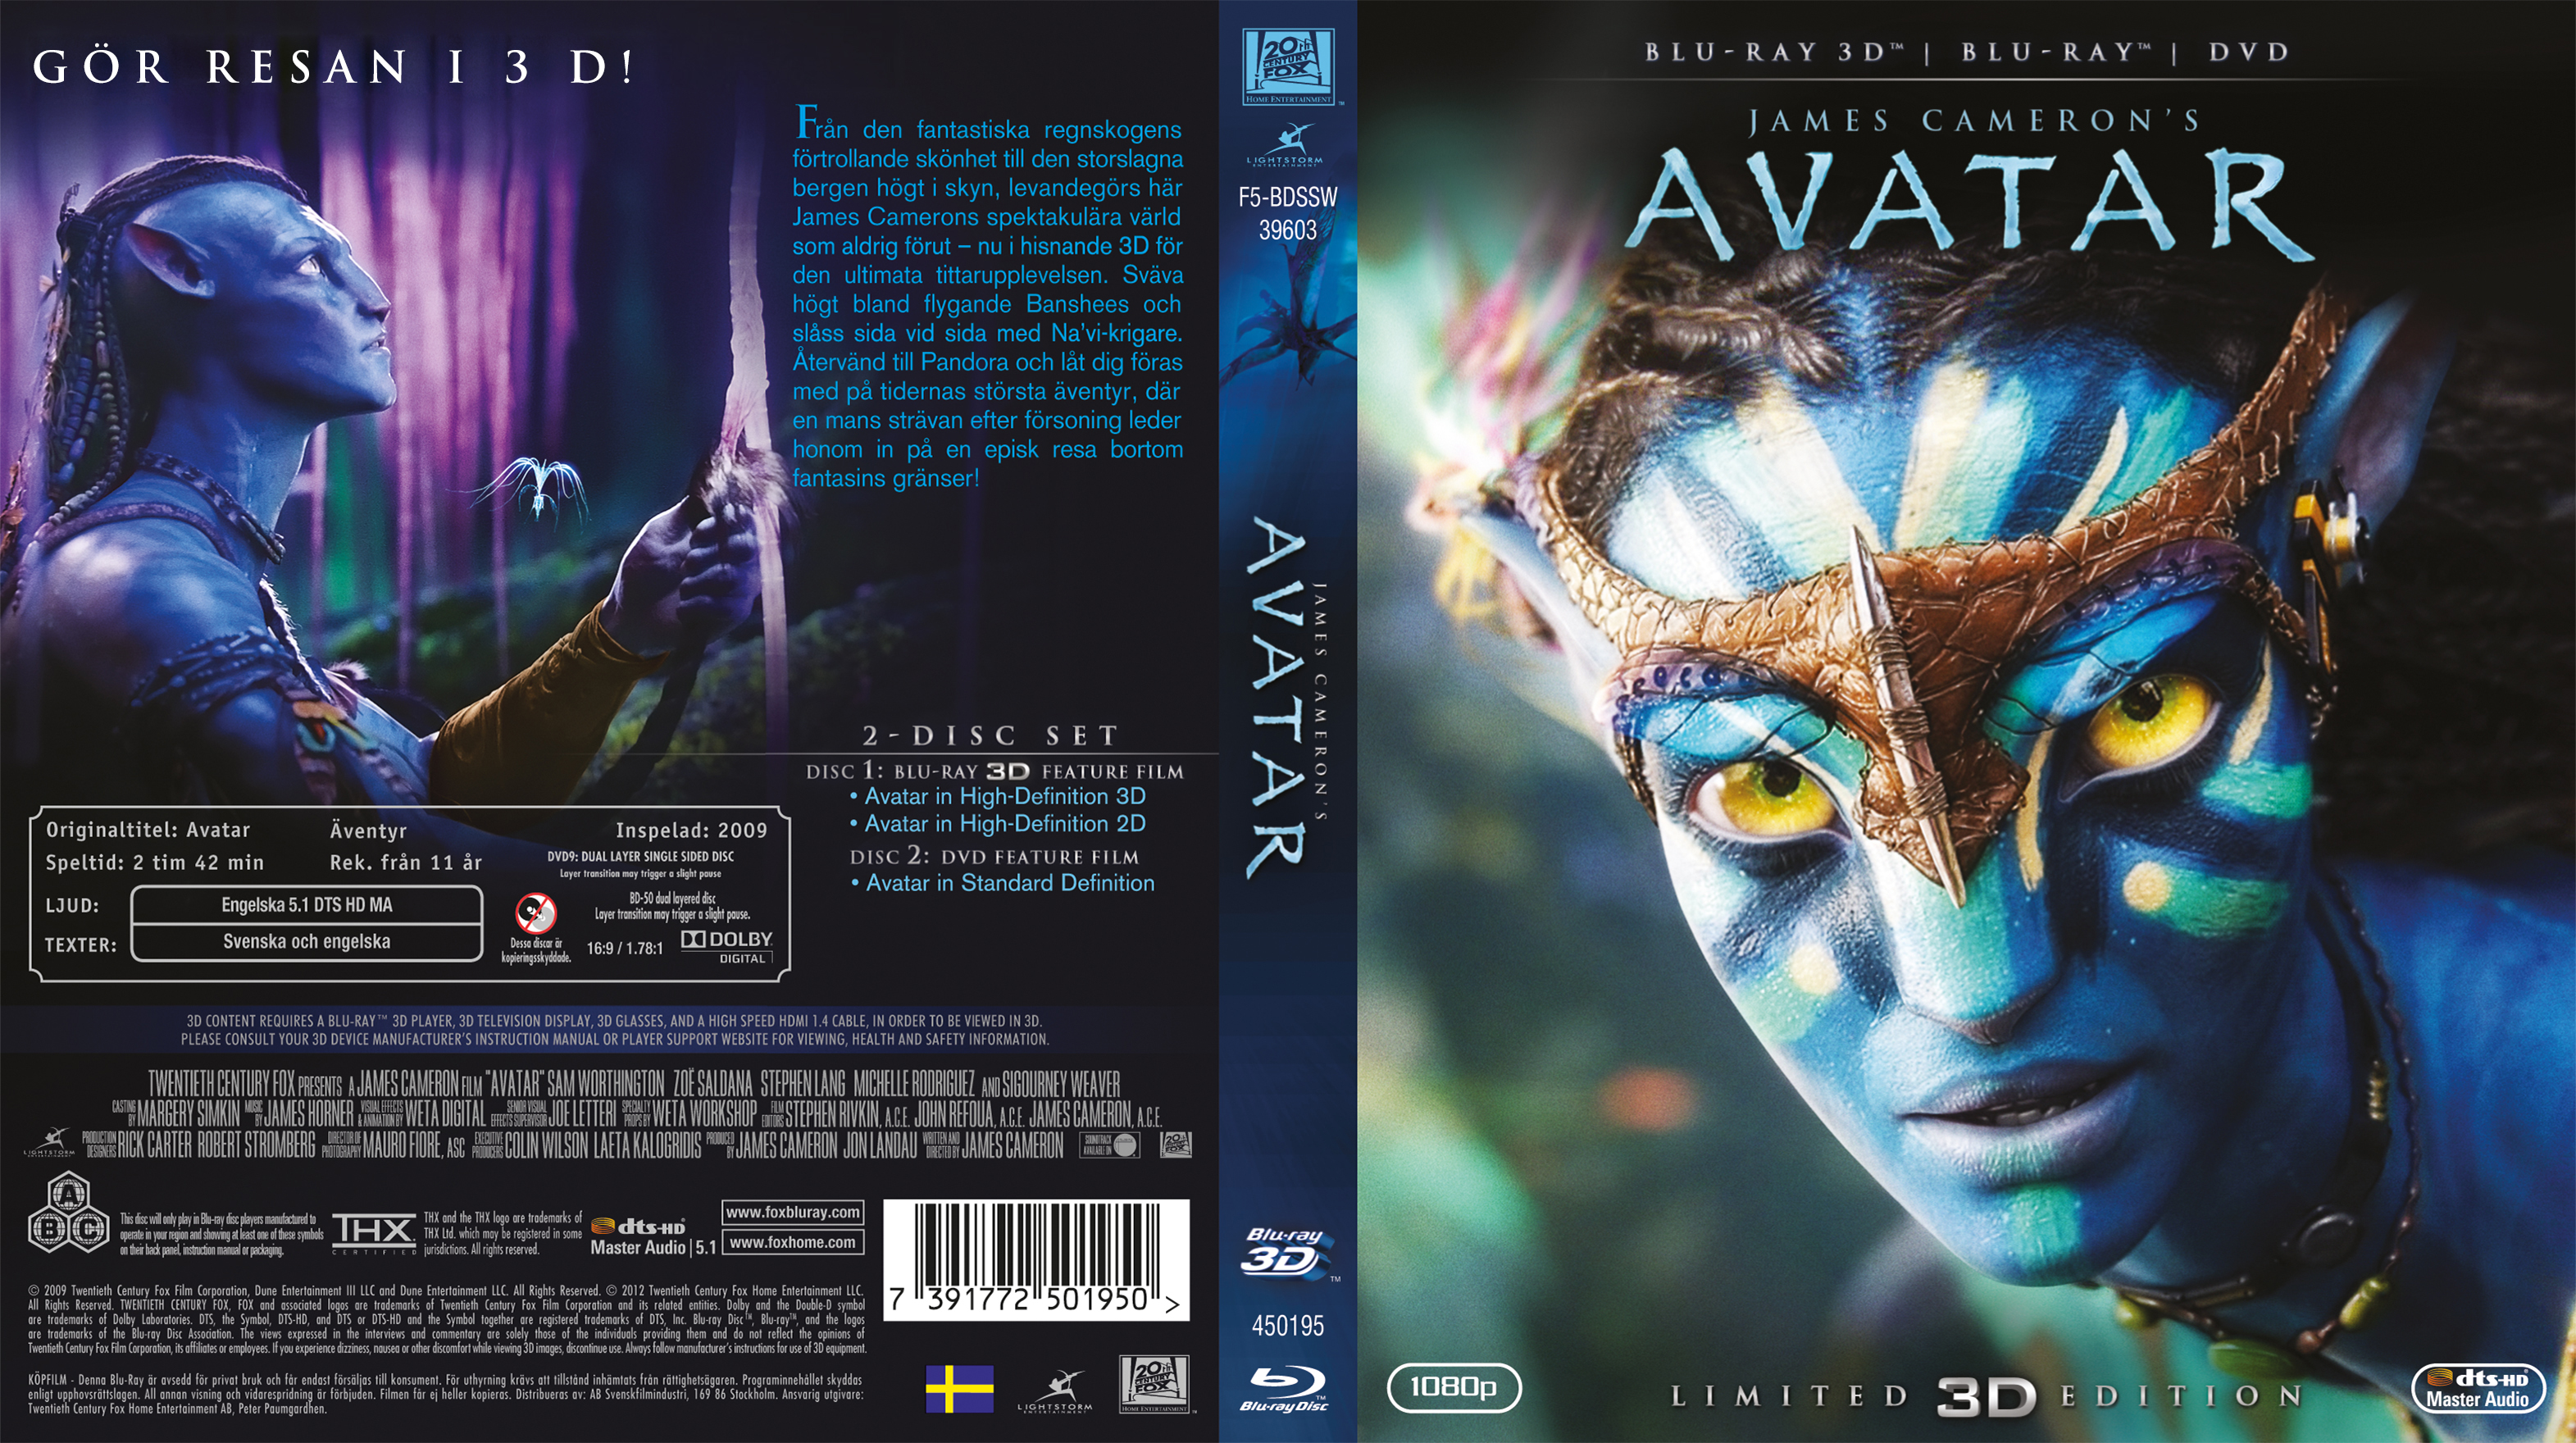 Avatar 2 The Way of Water leaked on torrent a day before its release   Smartprix